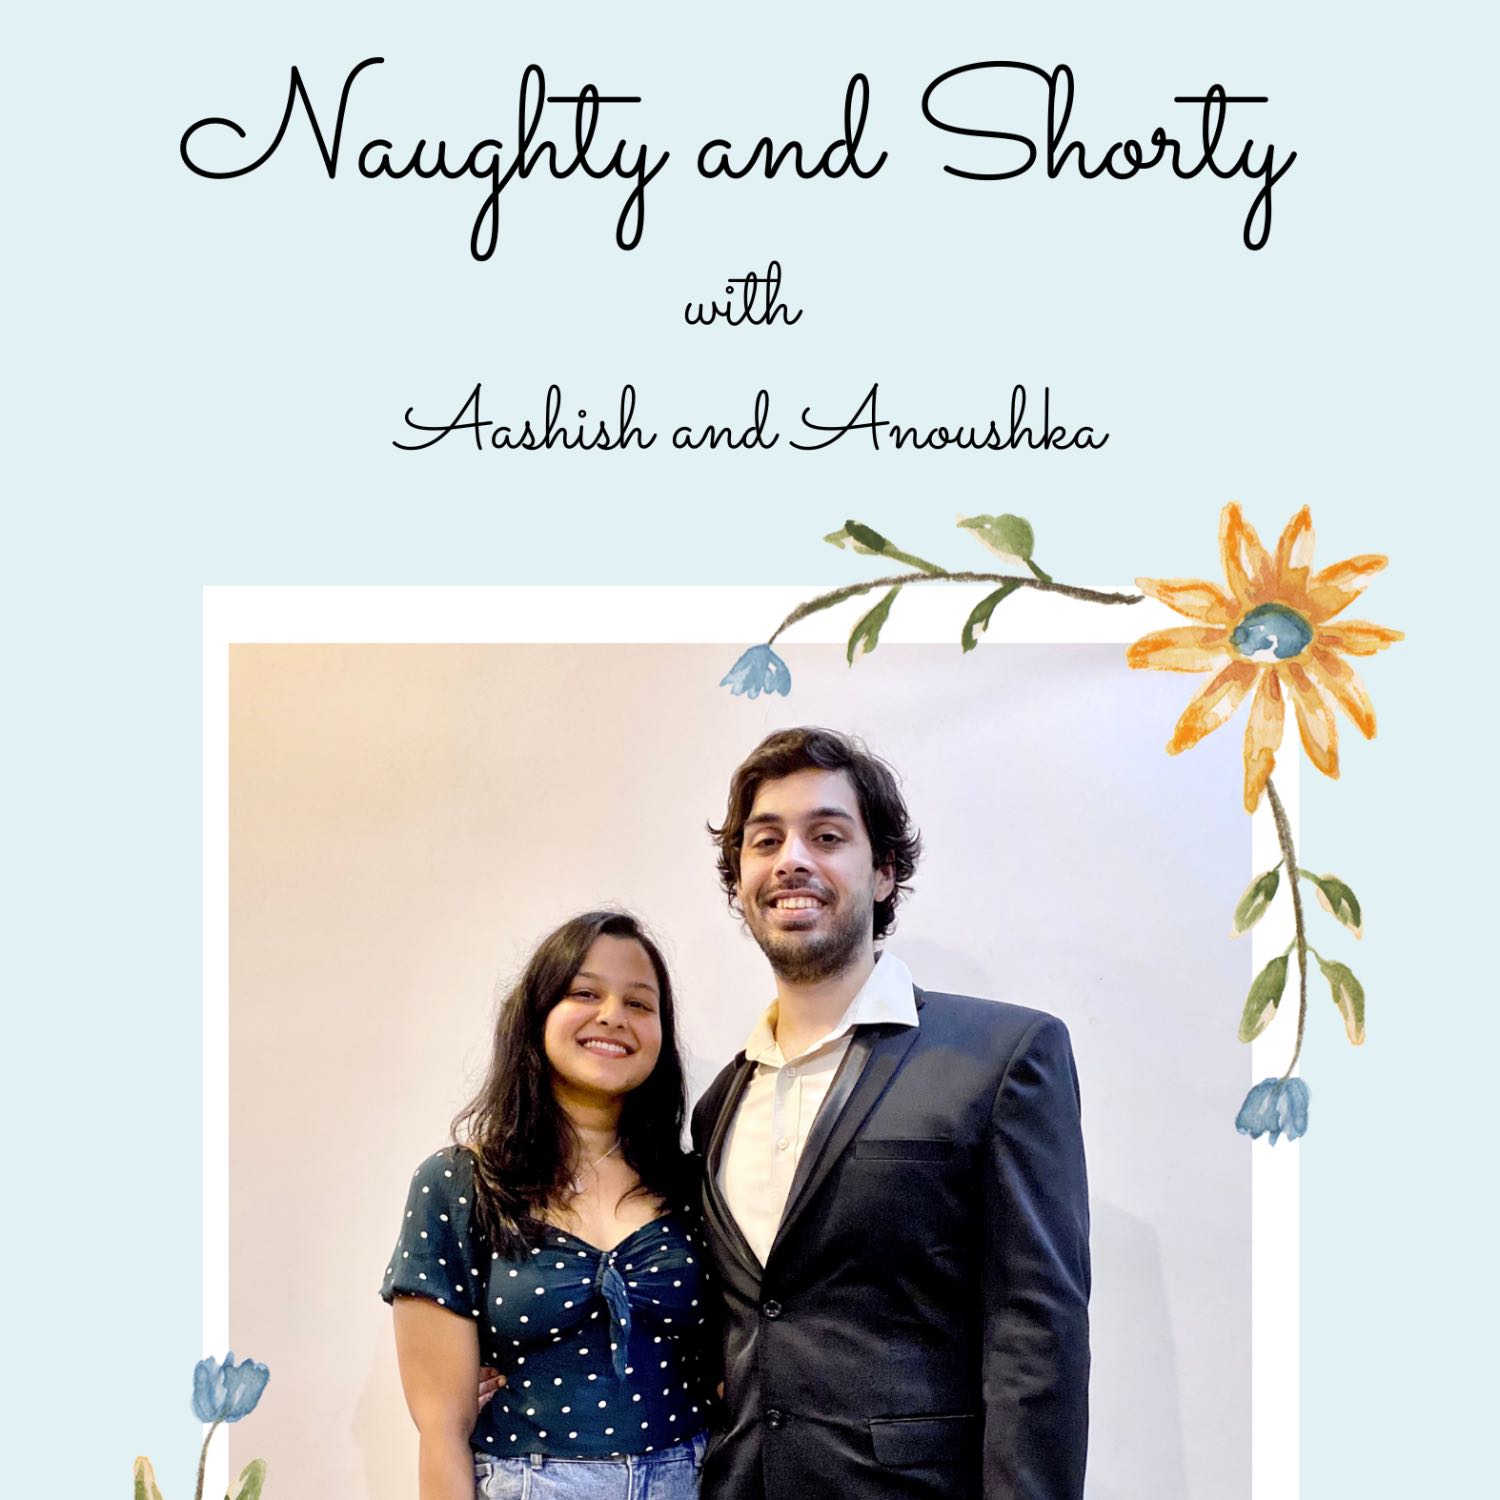 The Naughty and Shorty podcast